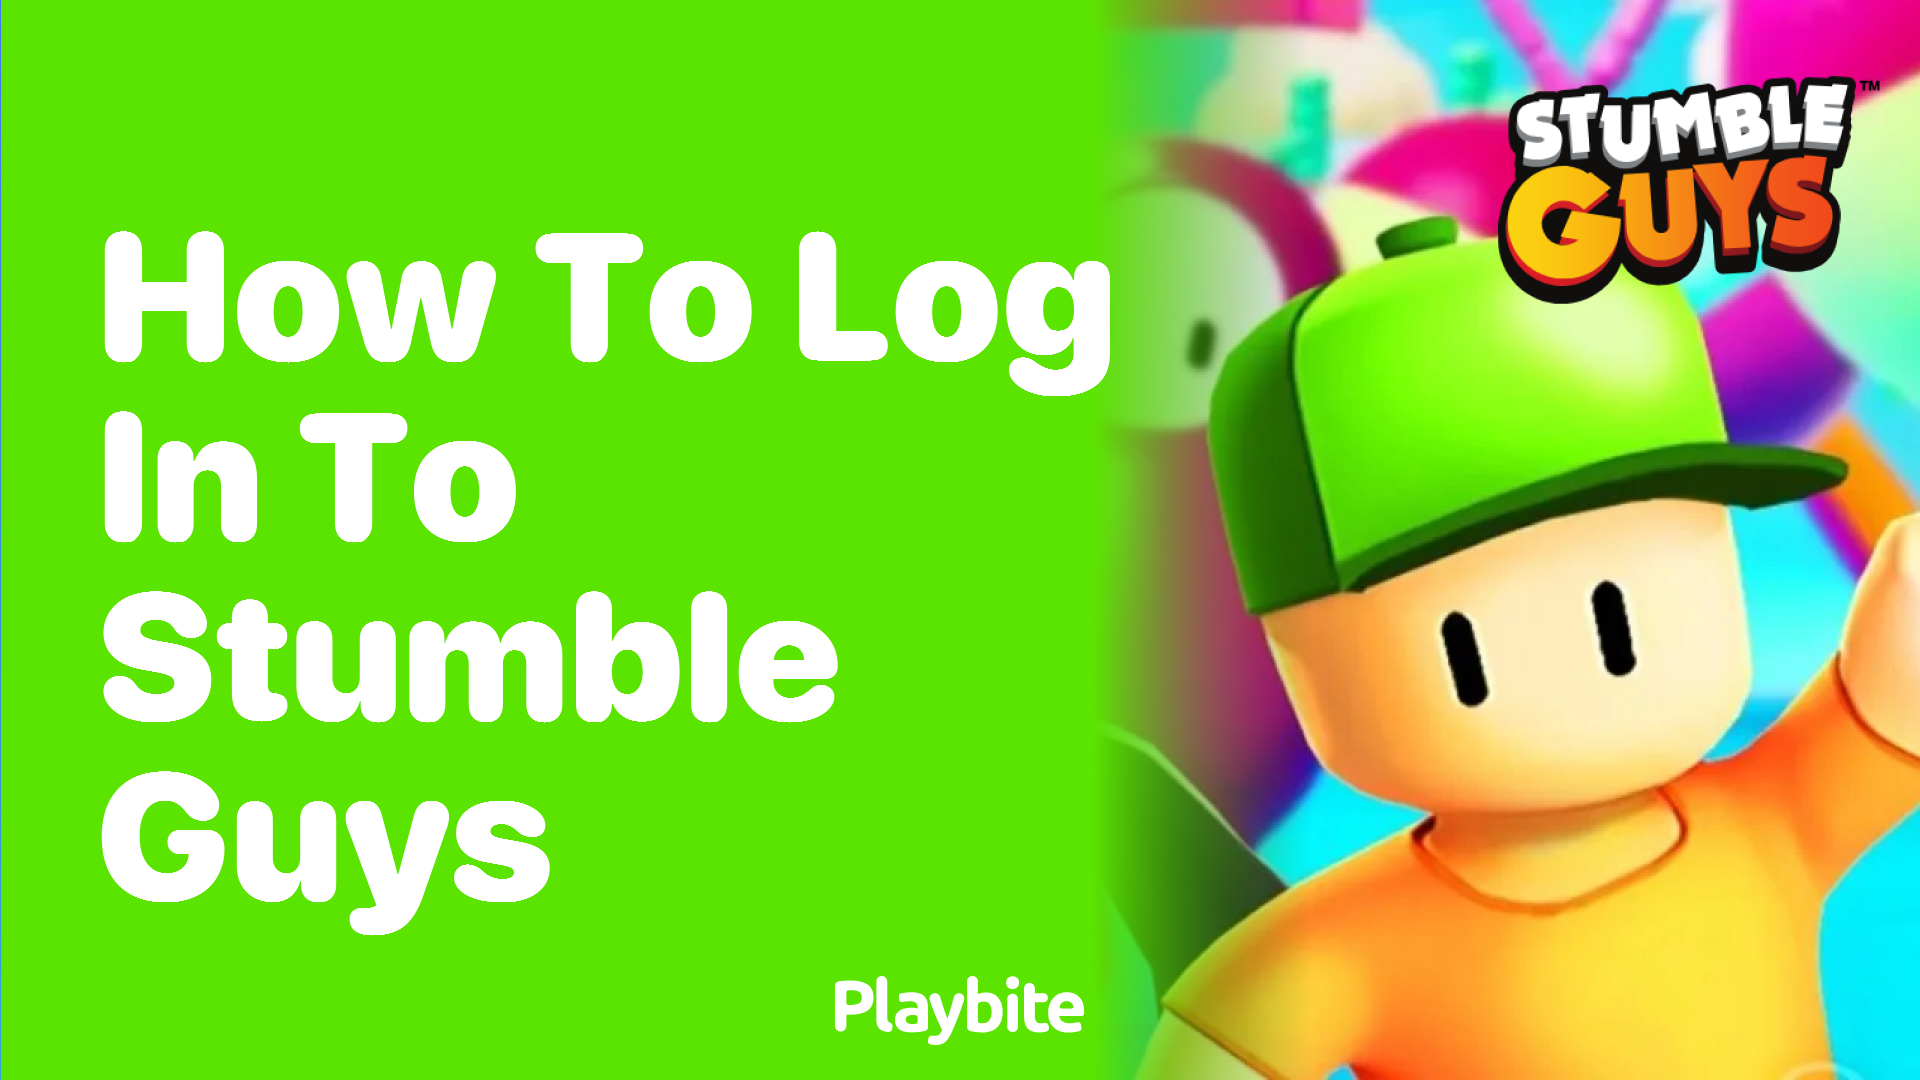 How to Log In to Stumble Guys: A Step-by-Step Guide